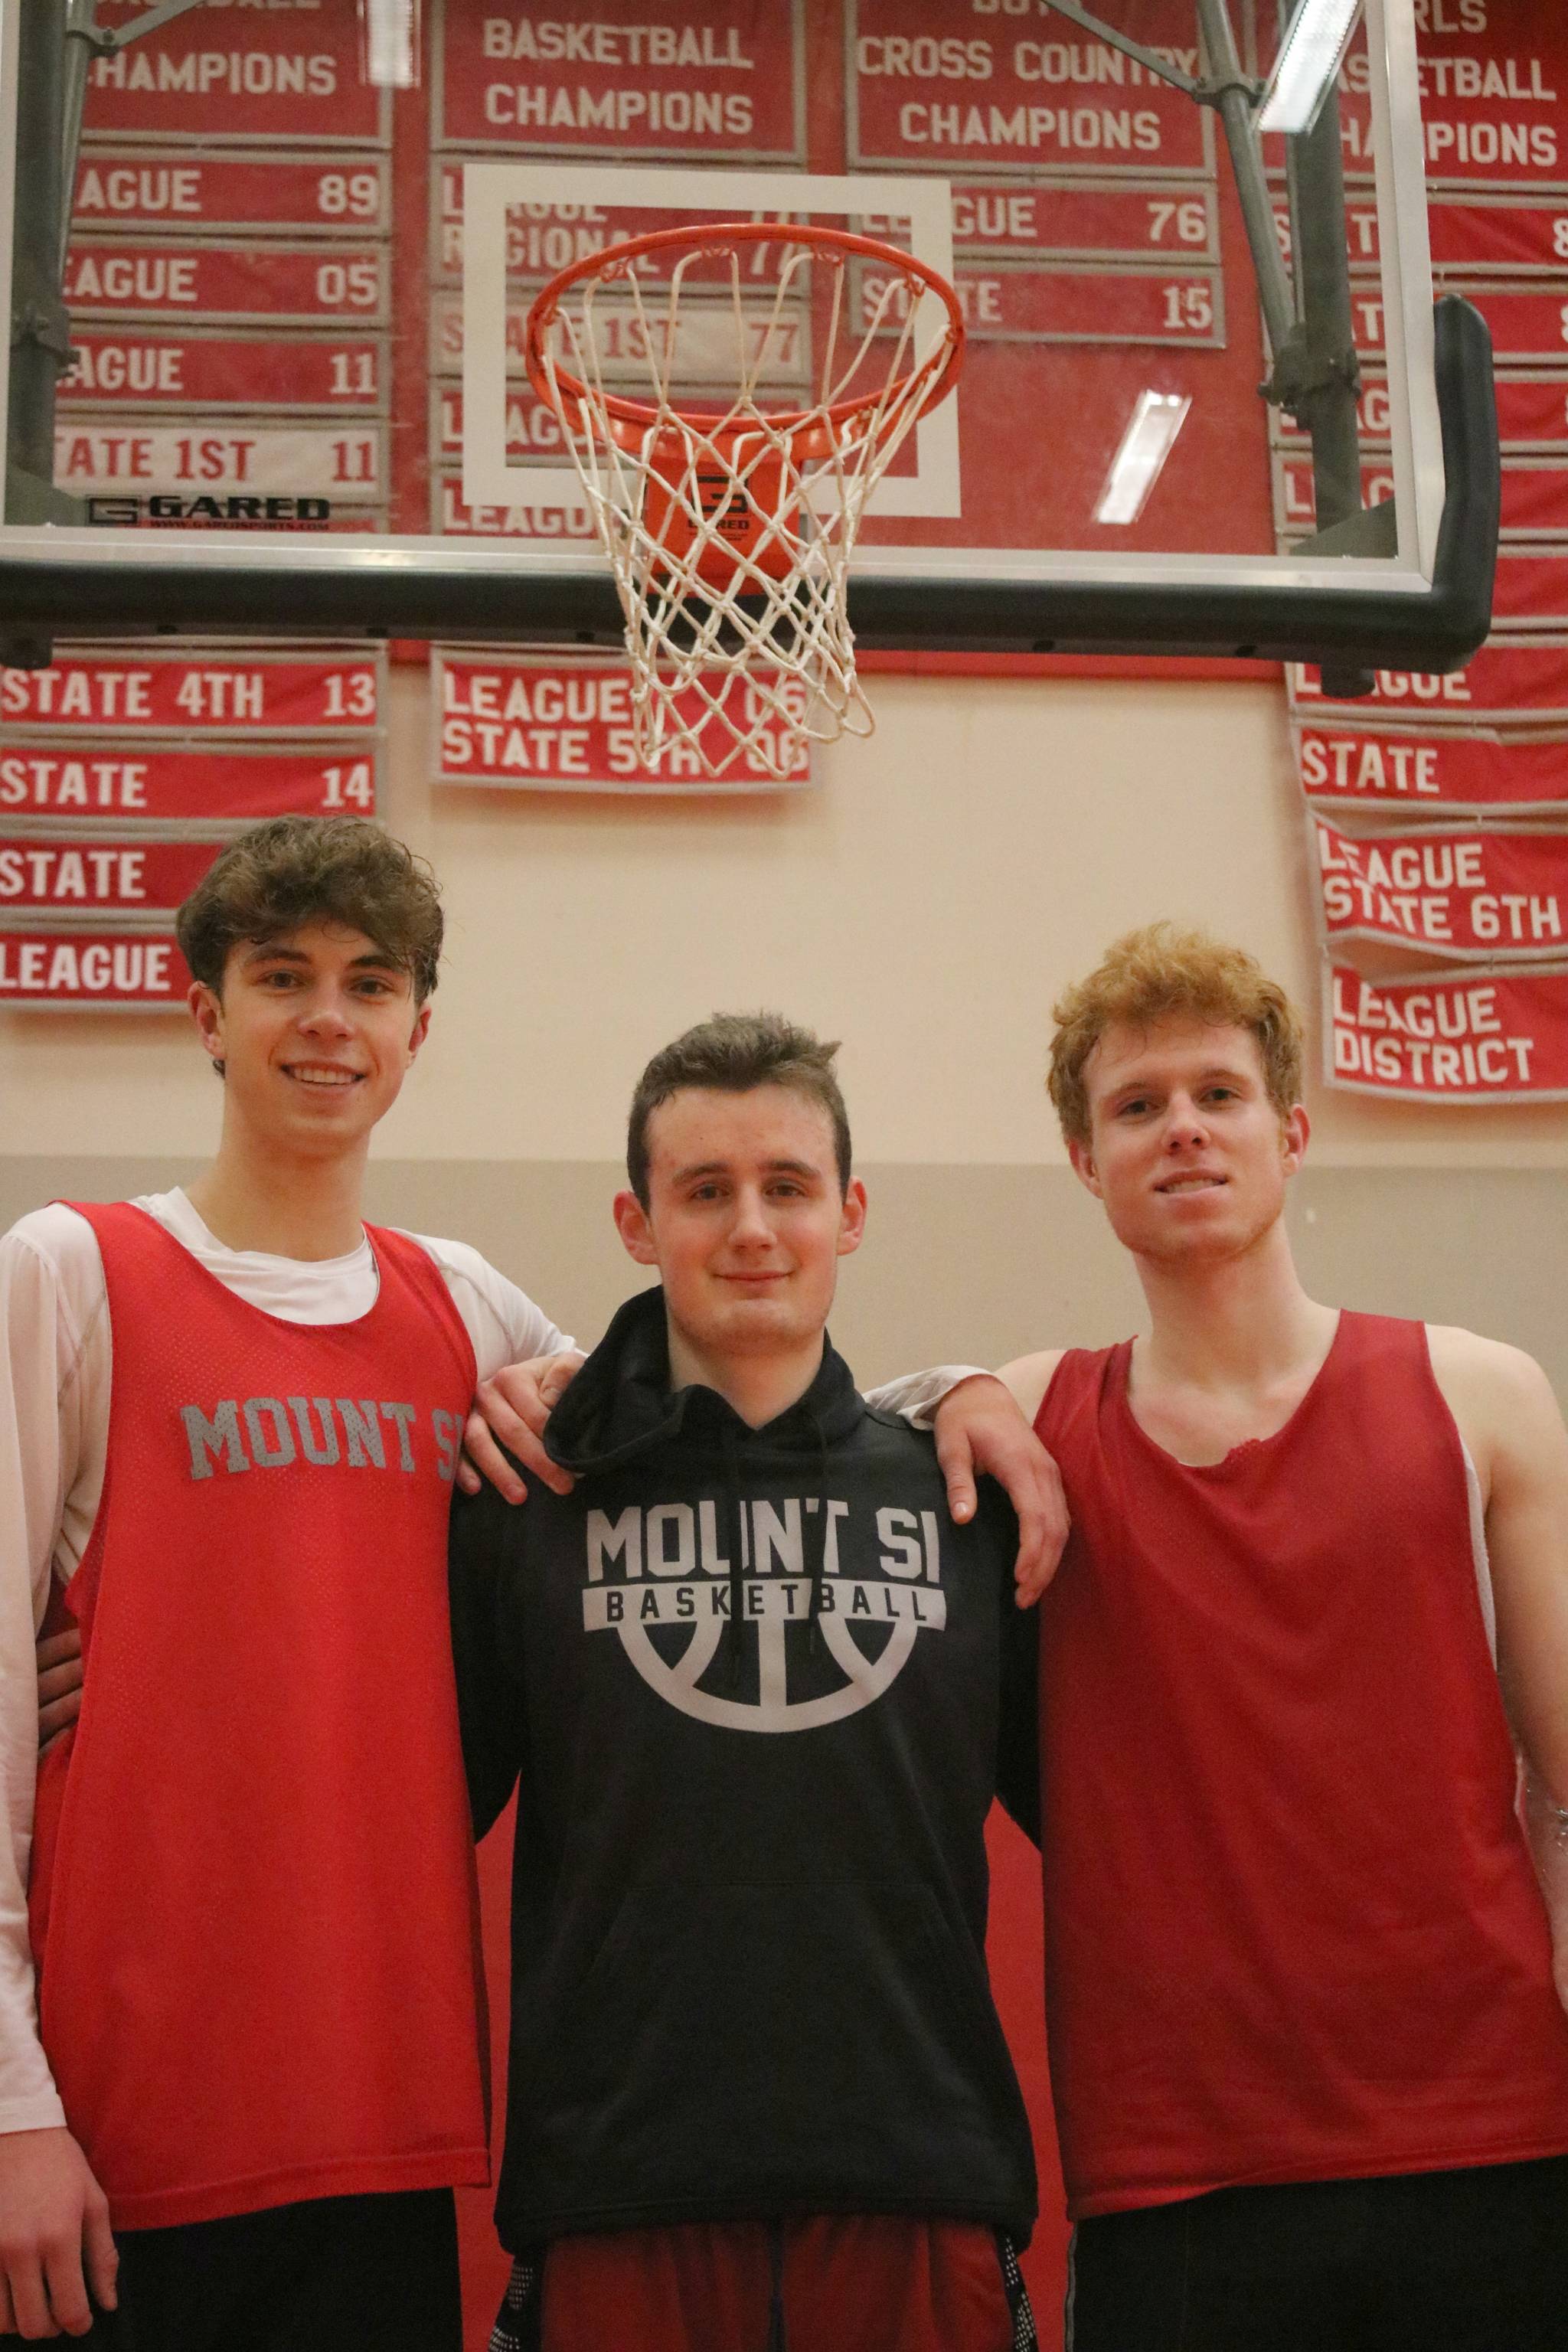 Some of Mount Si’s leaders, from left, Tyler Patterson, Brett Williams and Jabe Mullins. Andy Nystrom / staff photo